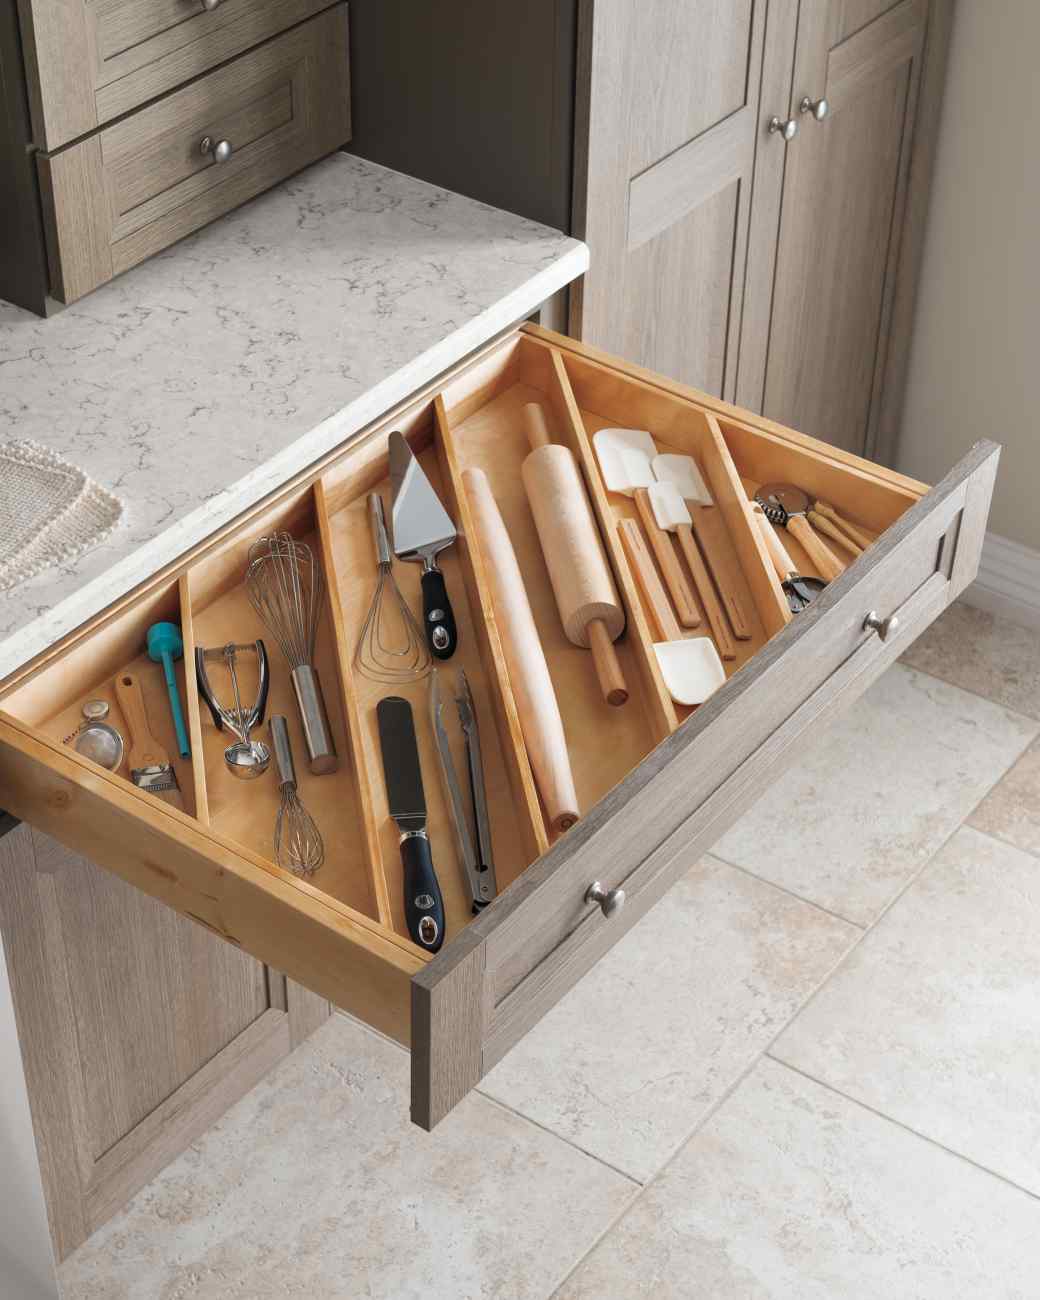 Divide Drawers Diagonally to Store More Items in Narrower Drawers